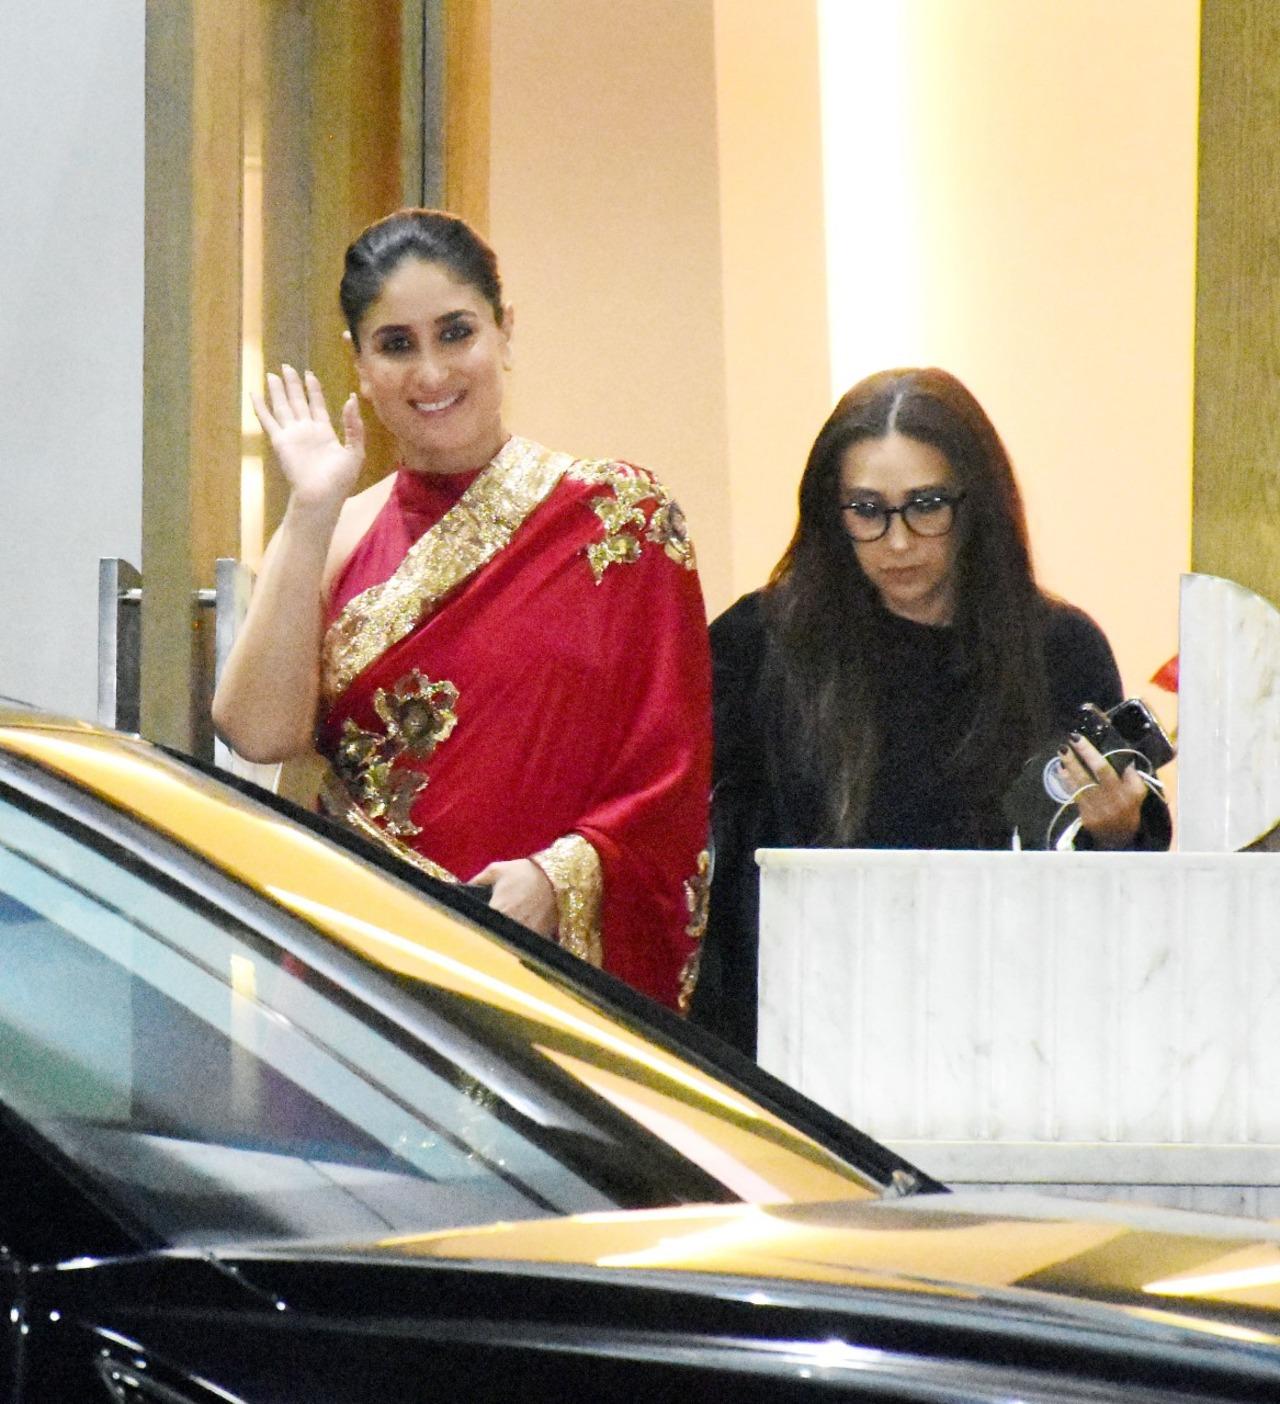 The famous Kapoor sisters, Kareena Kapoor Khan and Karisma Kapoor were also spotted at the airport. Kareena looked elegant in a red saree with floral prints, while Karisma kept things casual with a black hoodie